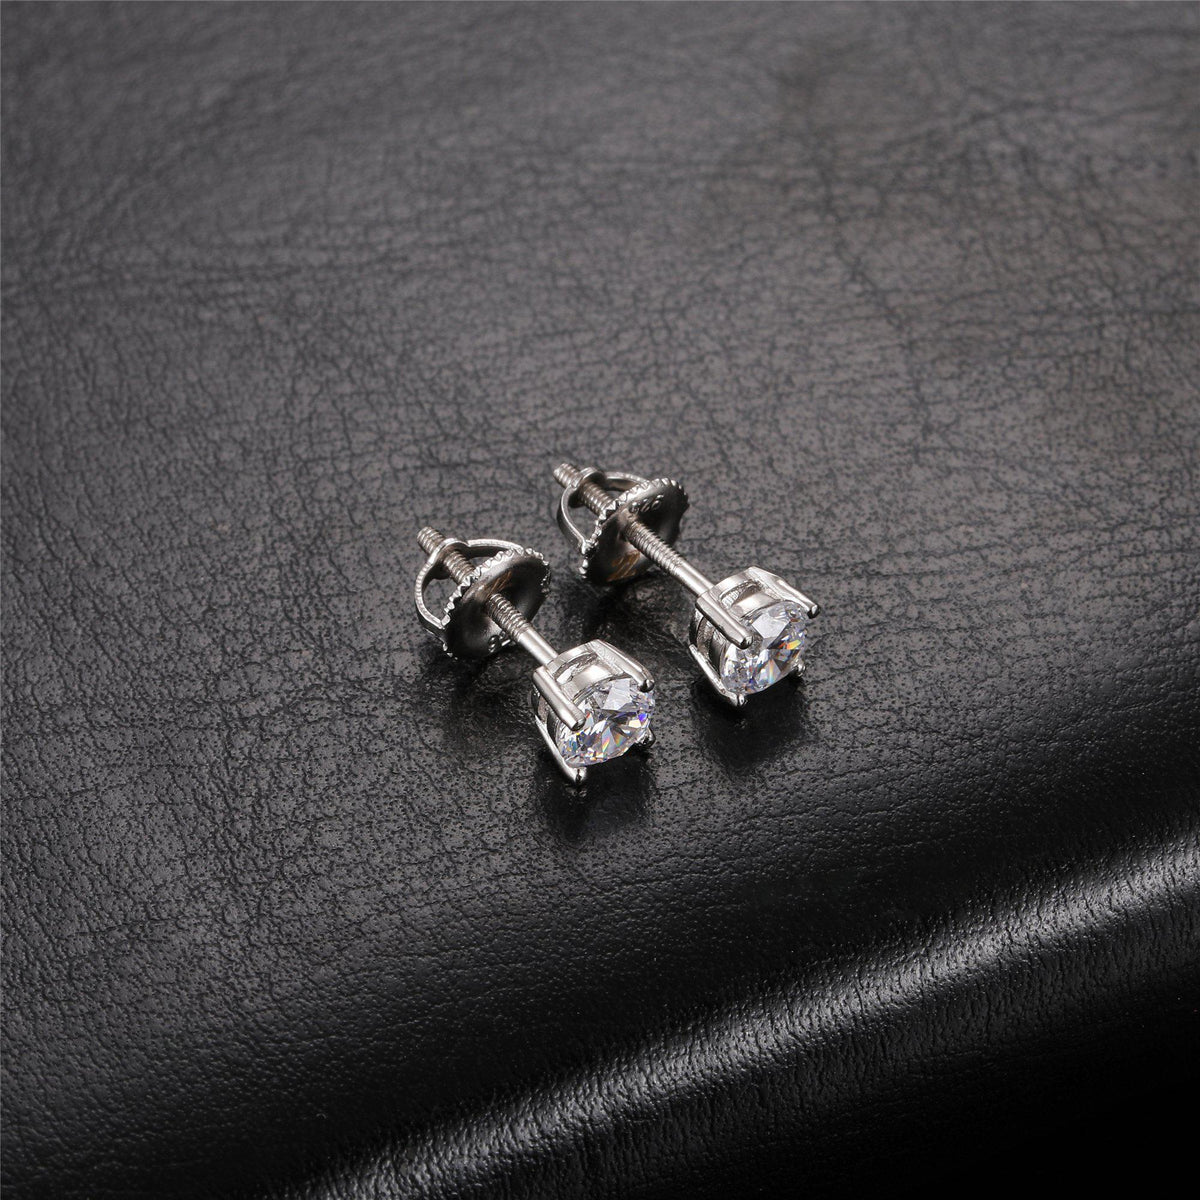 Solid 925 Silver Round Cut Diamond Earrings Pair - Icezzle